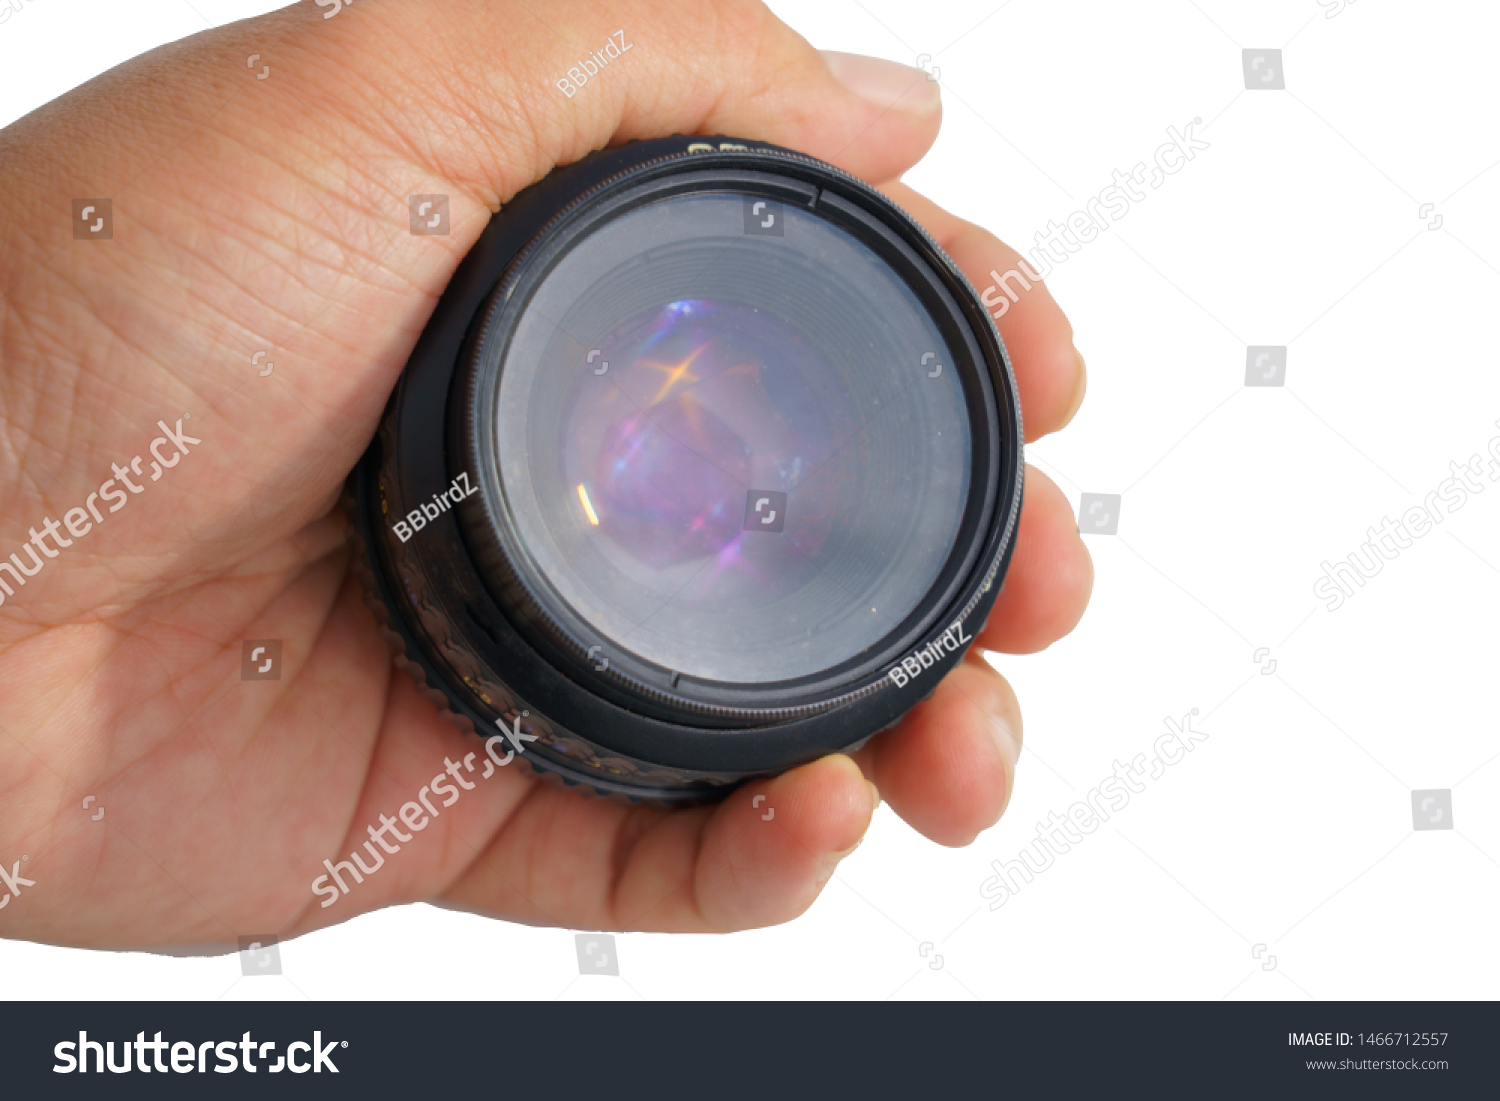 Clipping path old lens photos and classic camera an accident, dirty, fungus, diffuse in hand on white background concept studio. #1466712557